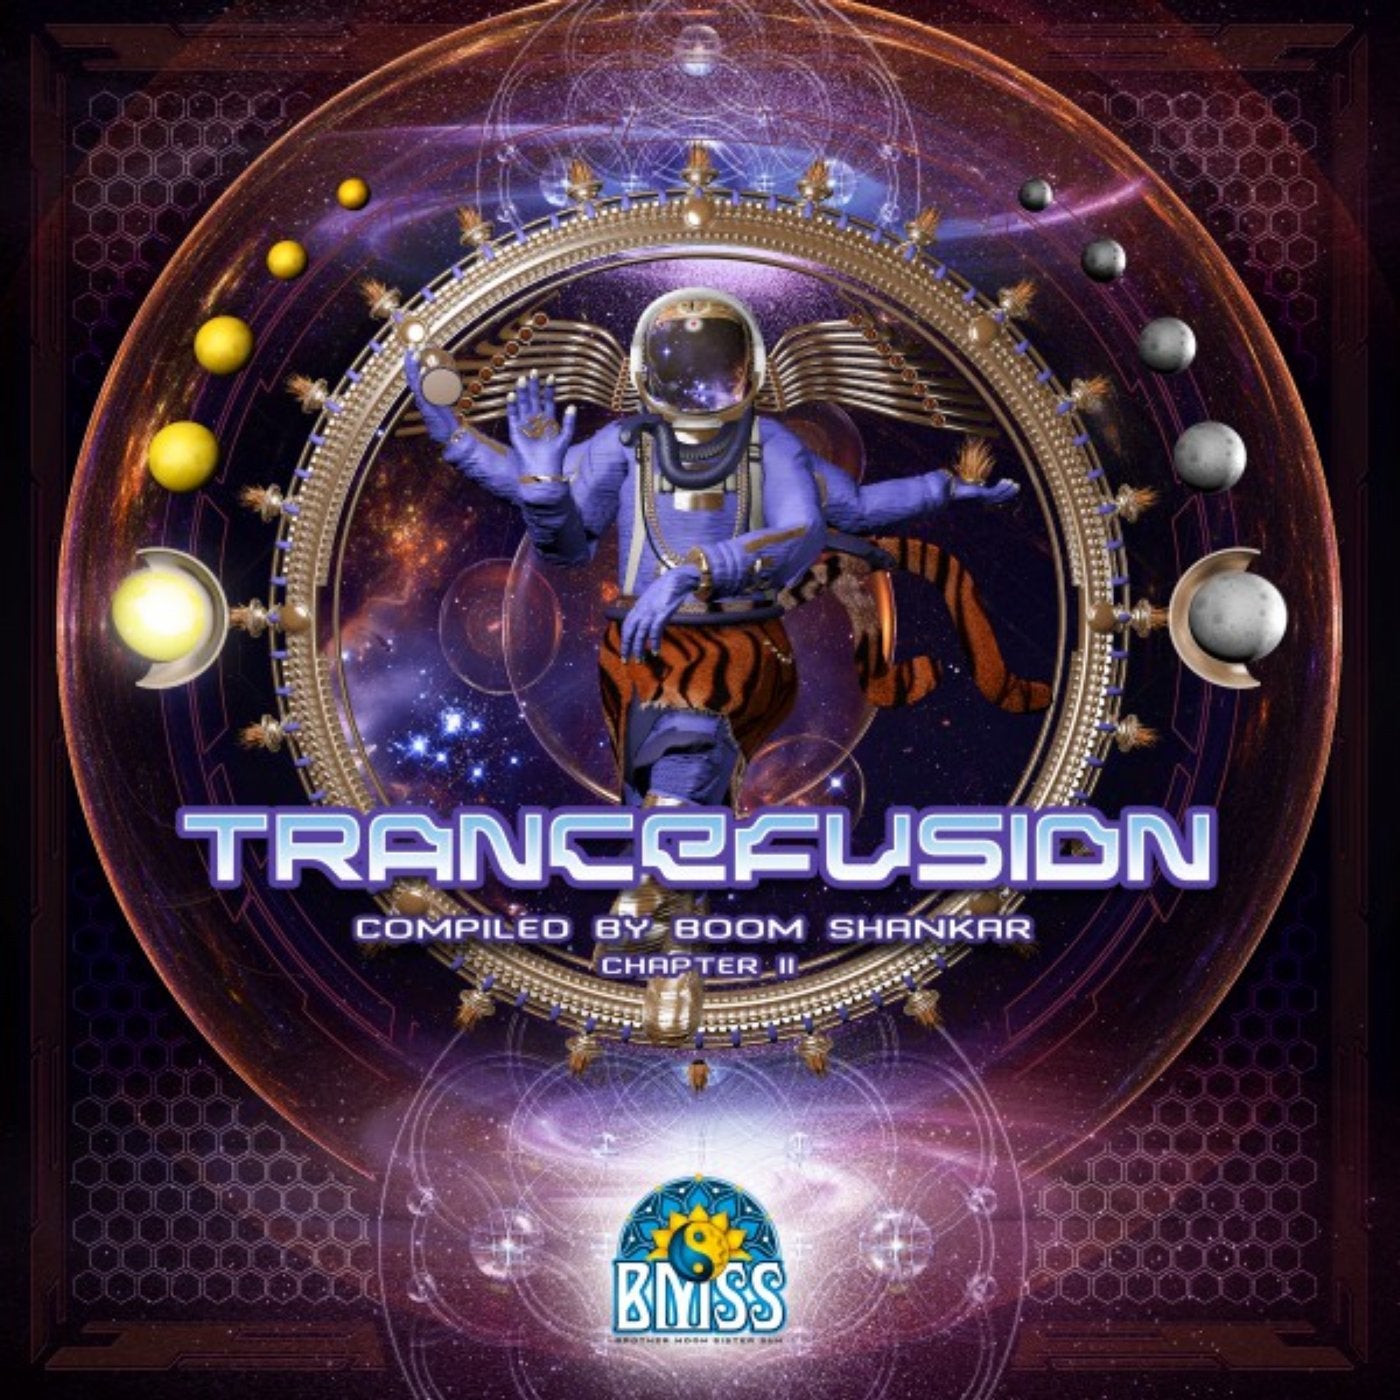 Trancefusion Chapter 2 (Compiled by Boom Shankar)